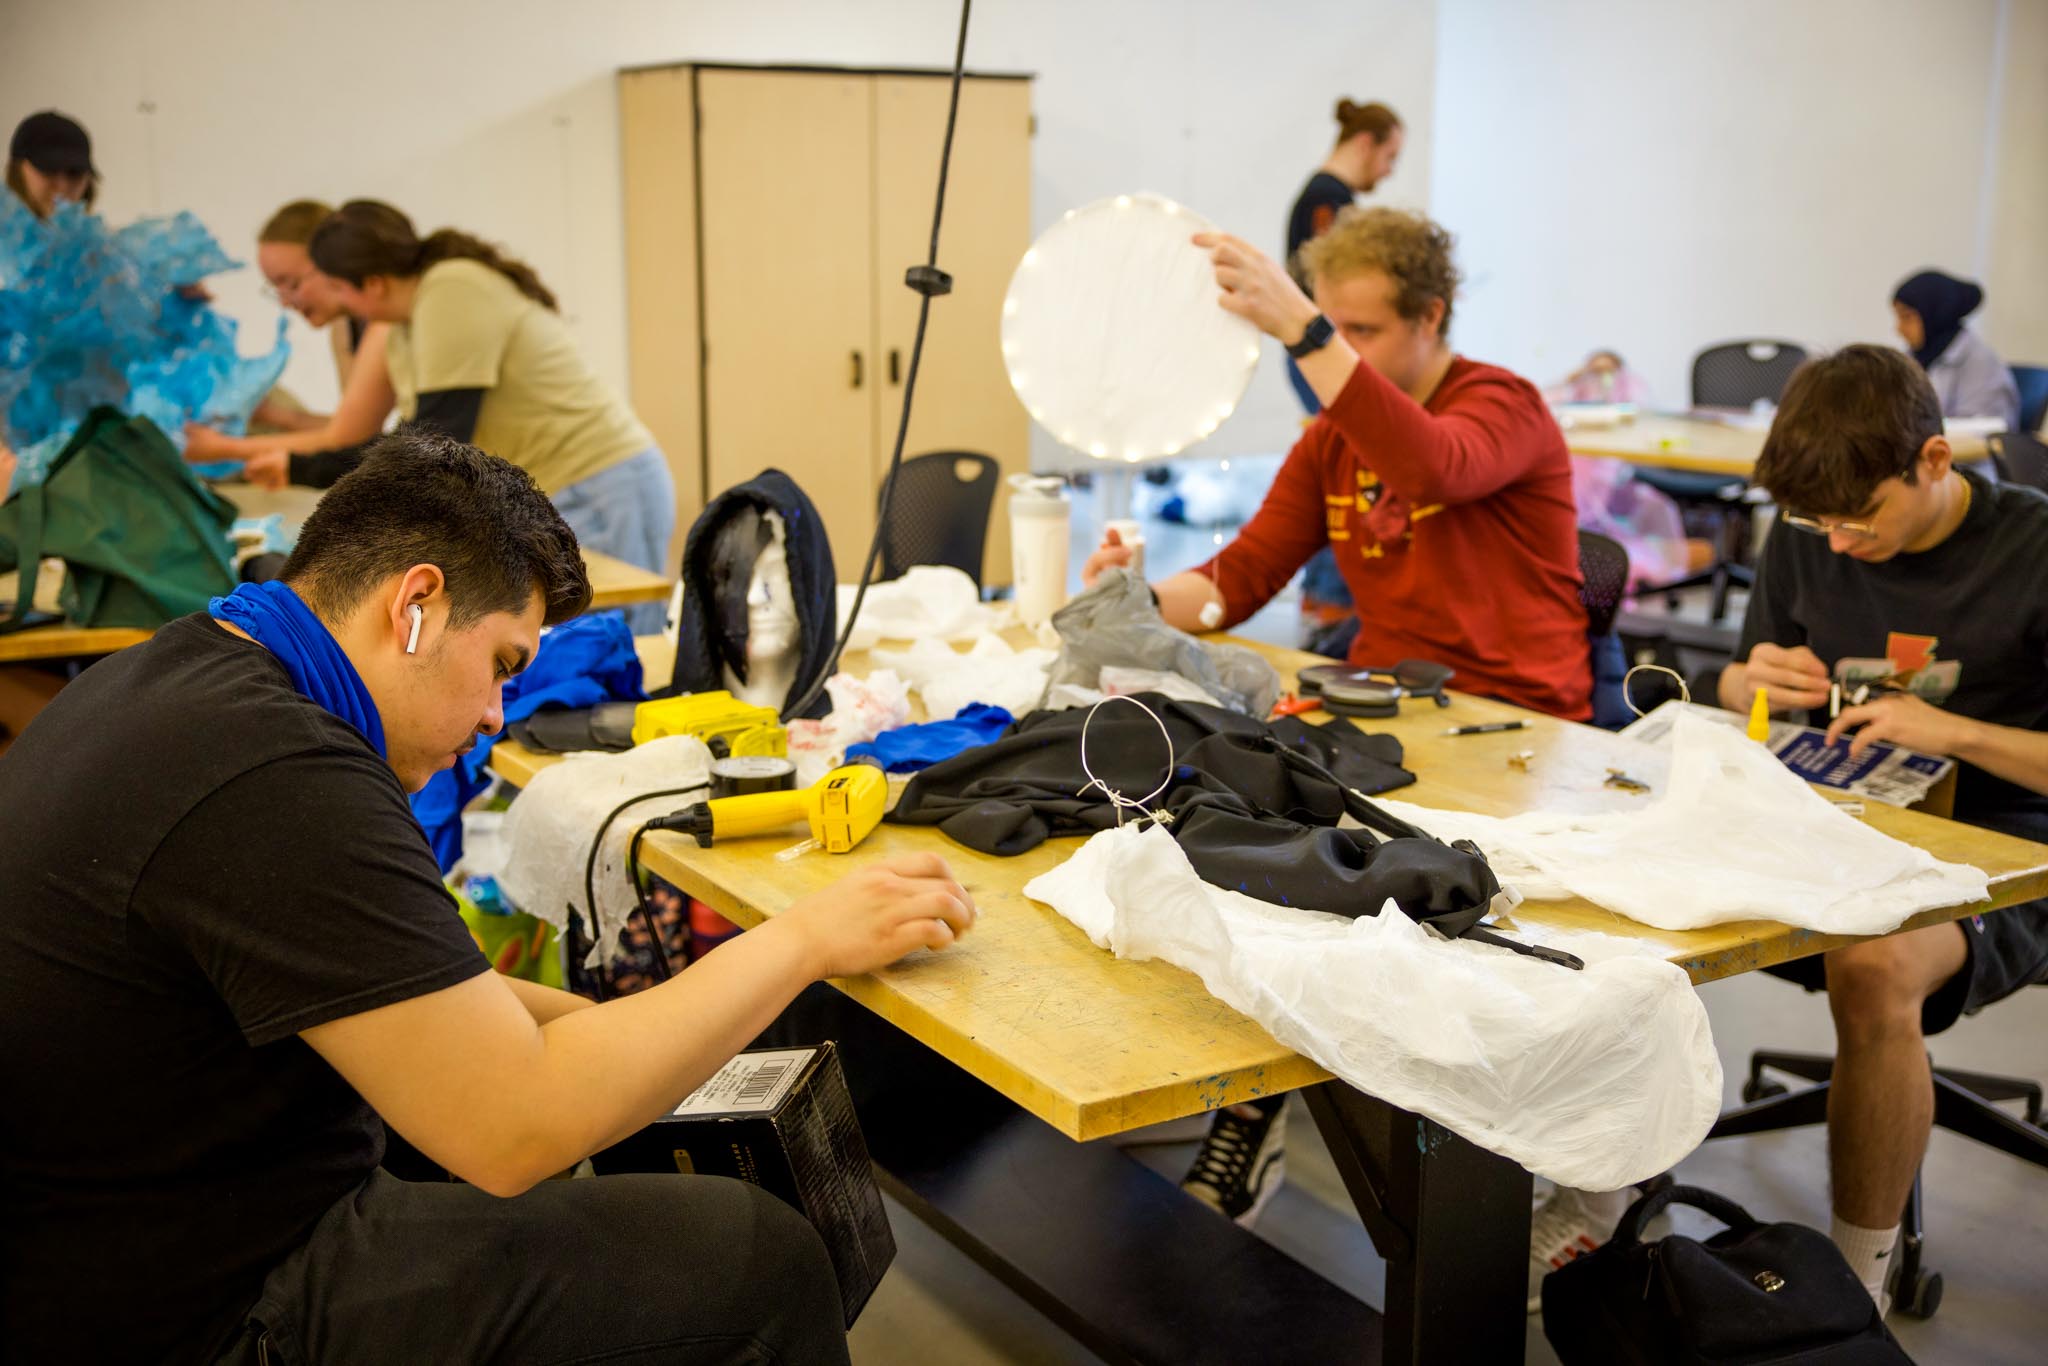 Students working on wearables project.